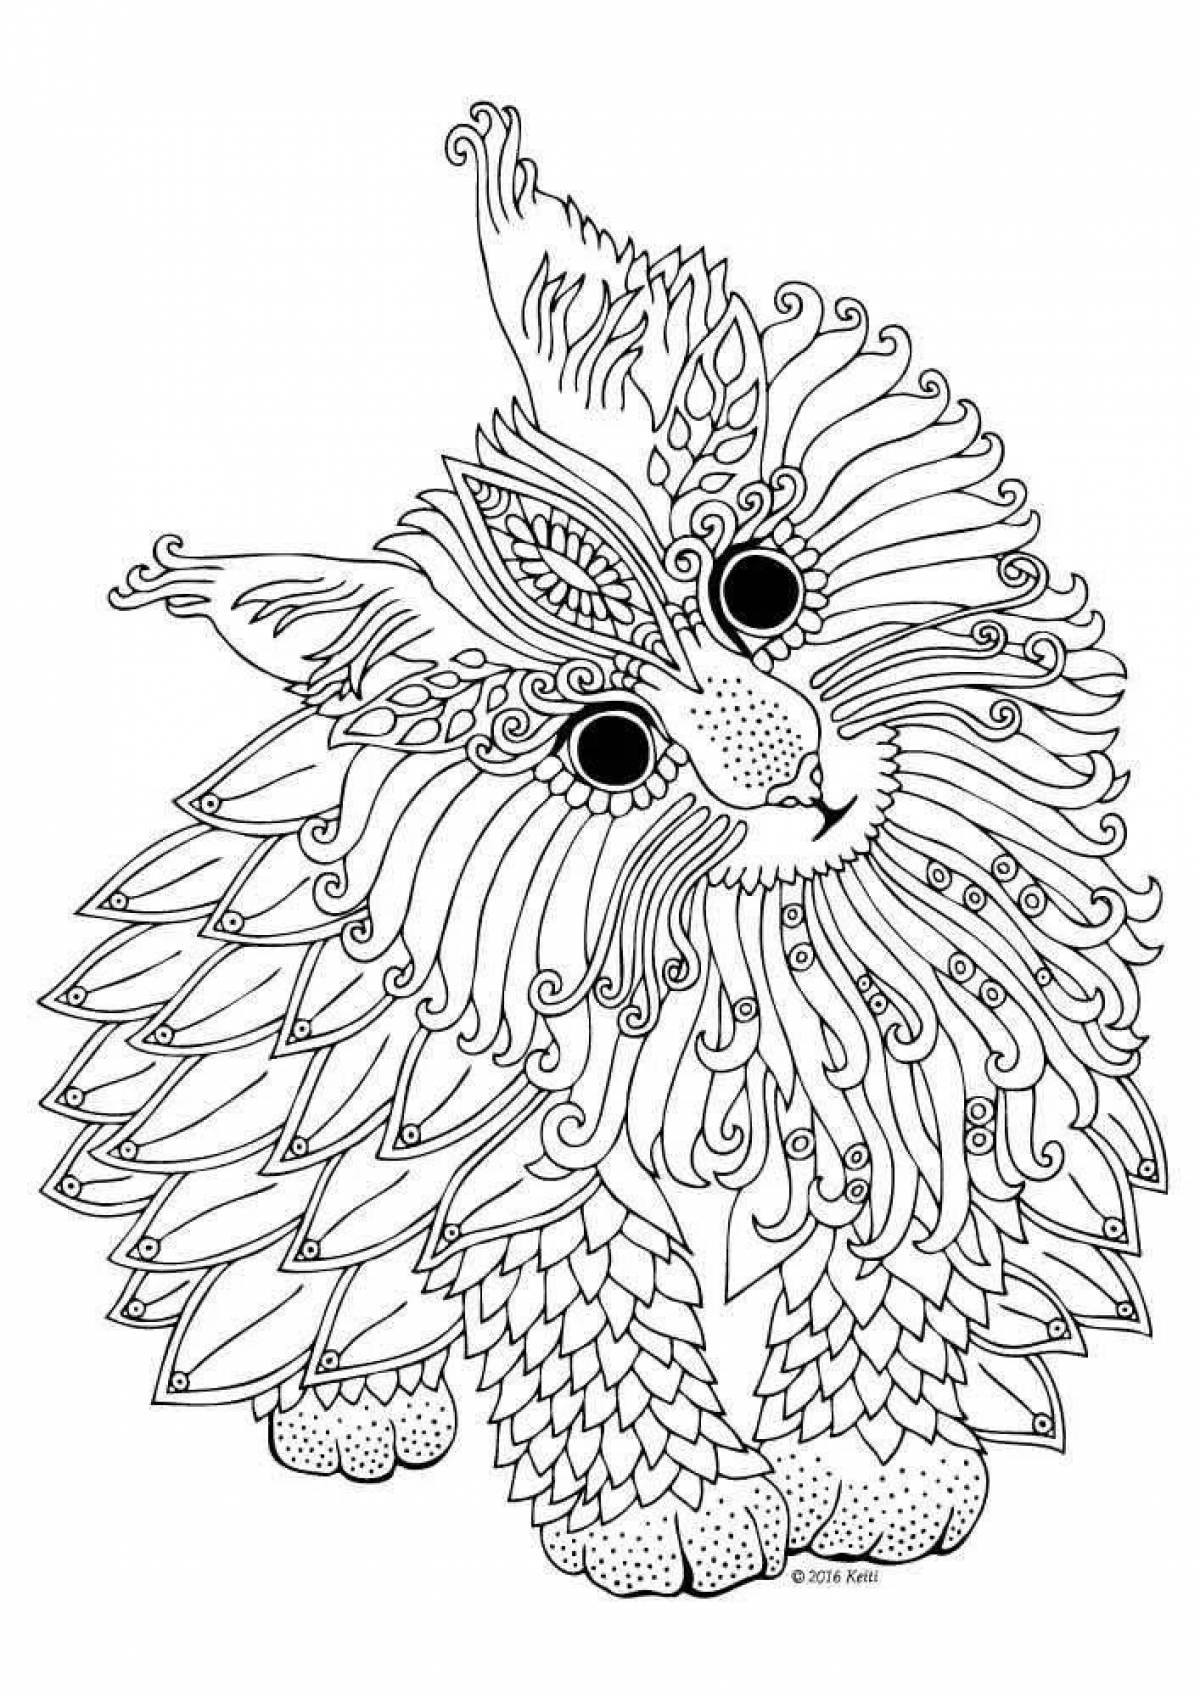 Exquisite animal mandala coloring page